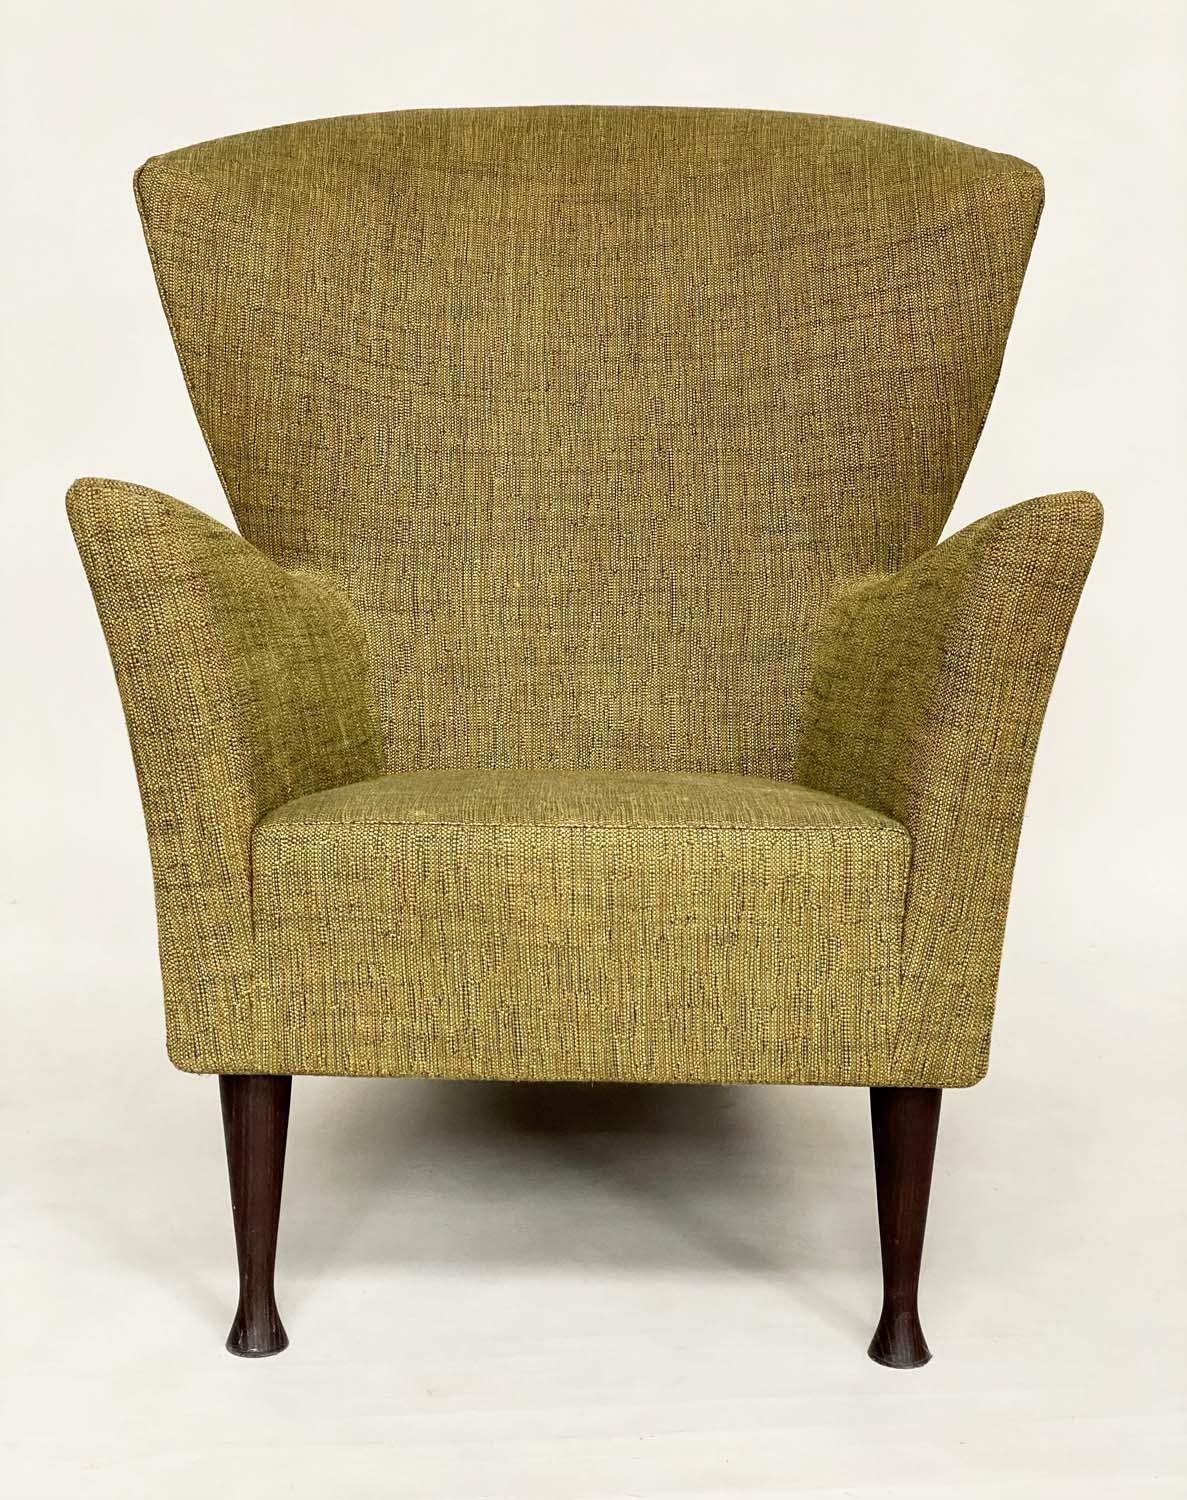 MANNER OF HOWARD KEITH ARMCHAIR, vintage 60s with wing back angular arms and green linen weave - Image 4 of 5